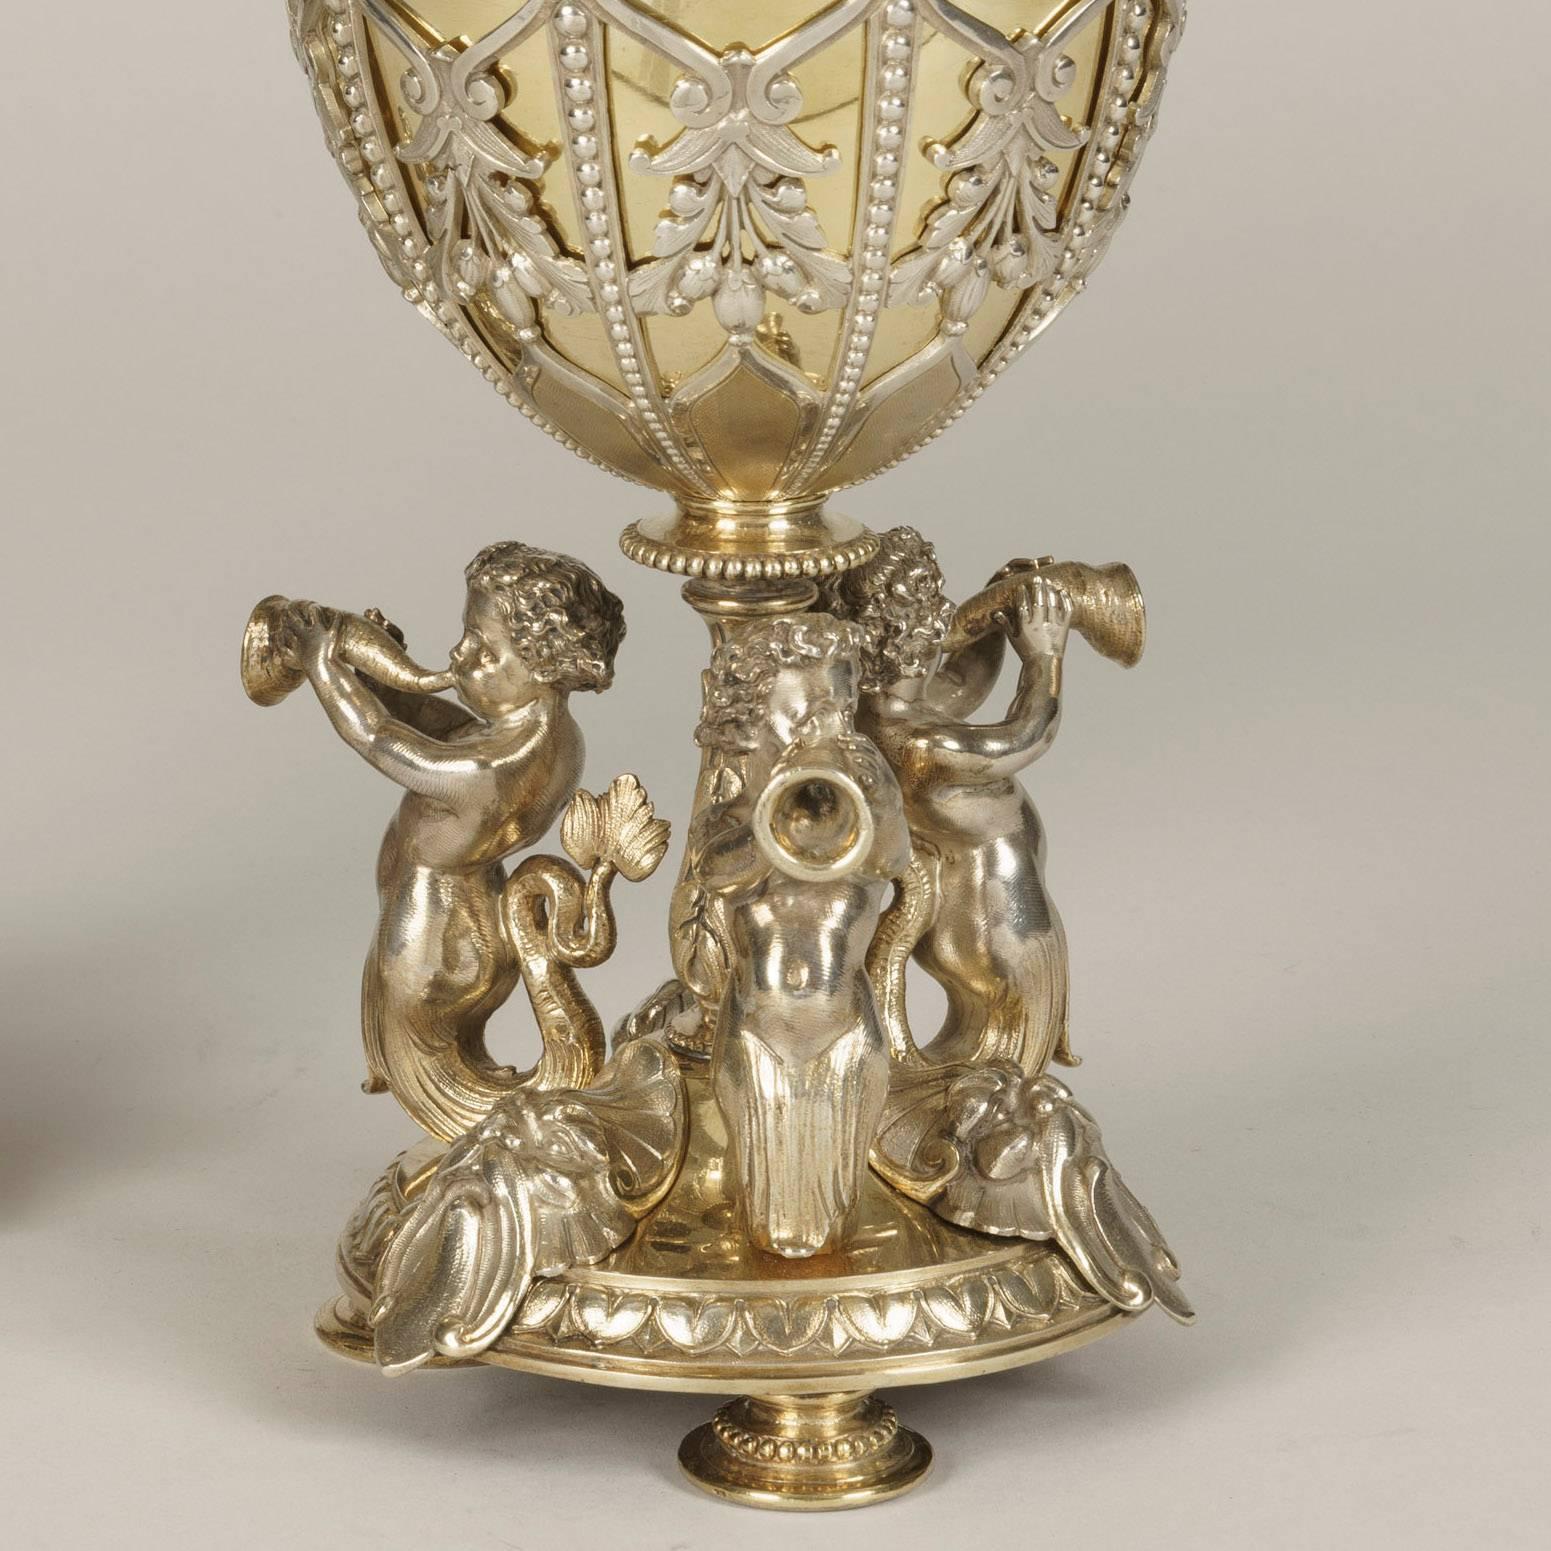 A pair of Elkington & Company lidded confitures

The silver plated vases bear to the underside, Elkington & Co marks, and the date letter for 1873. The circular bases rise on three spun feet, having three tritons blowing on conch shells set about